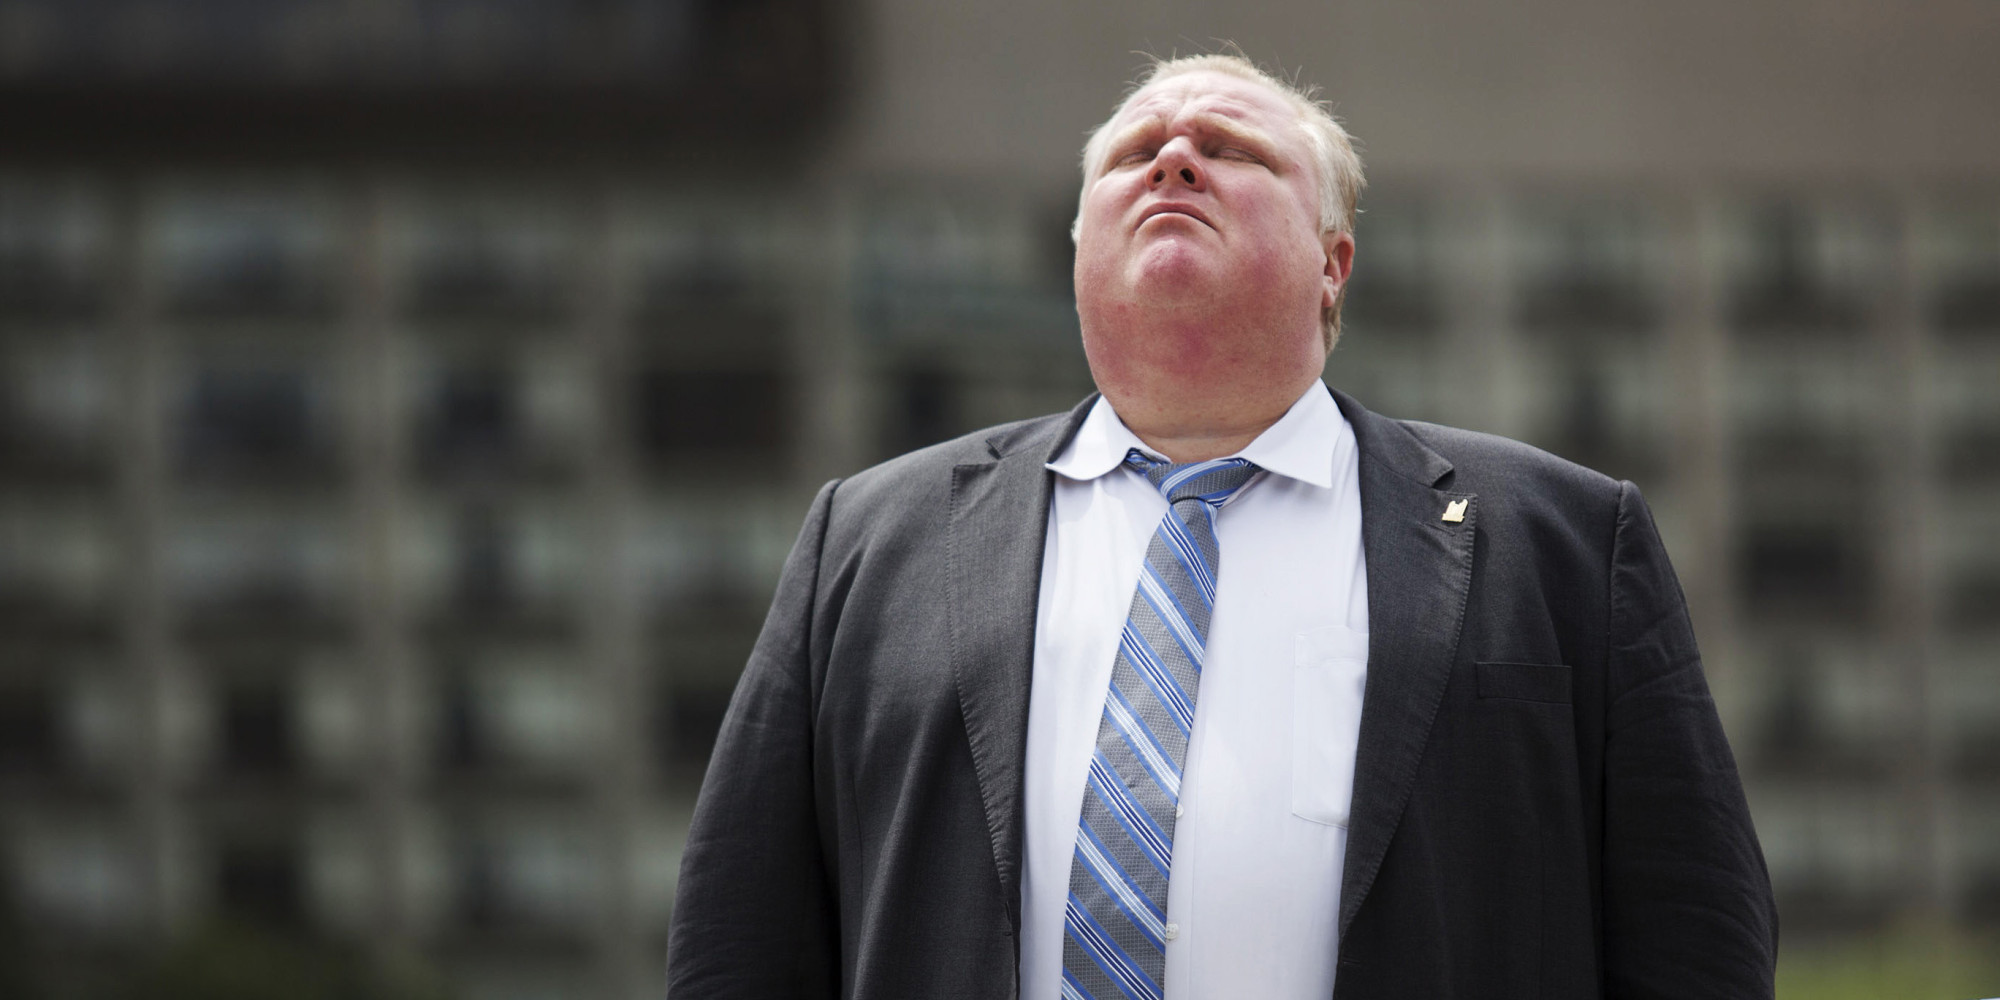 Impeach rob ford petition